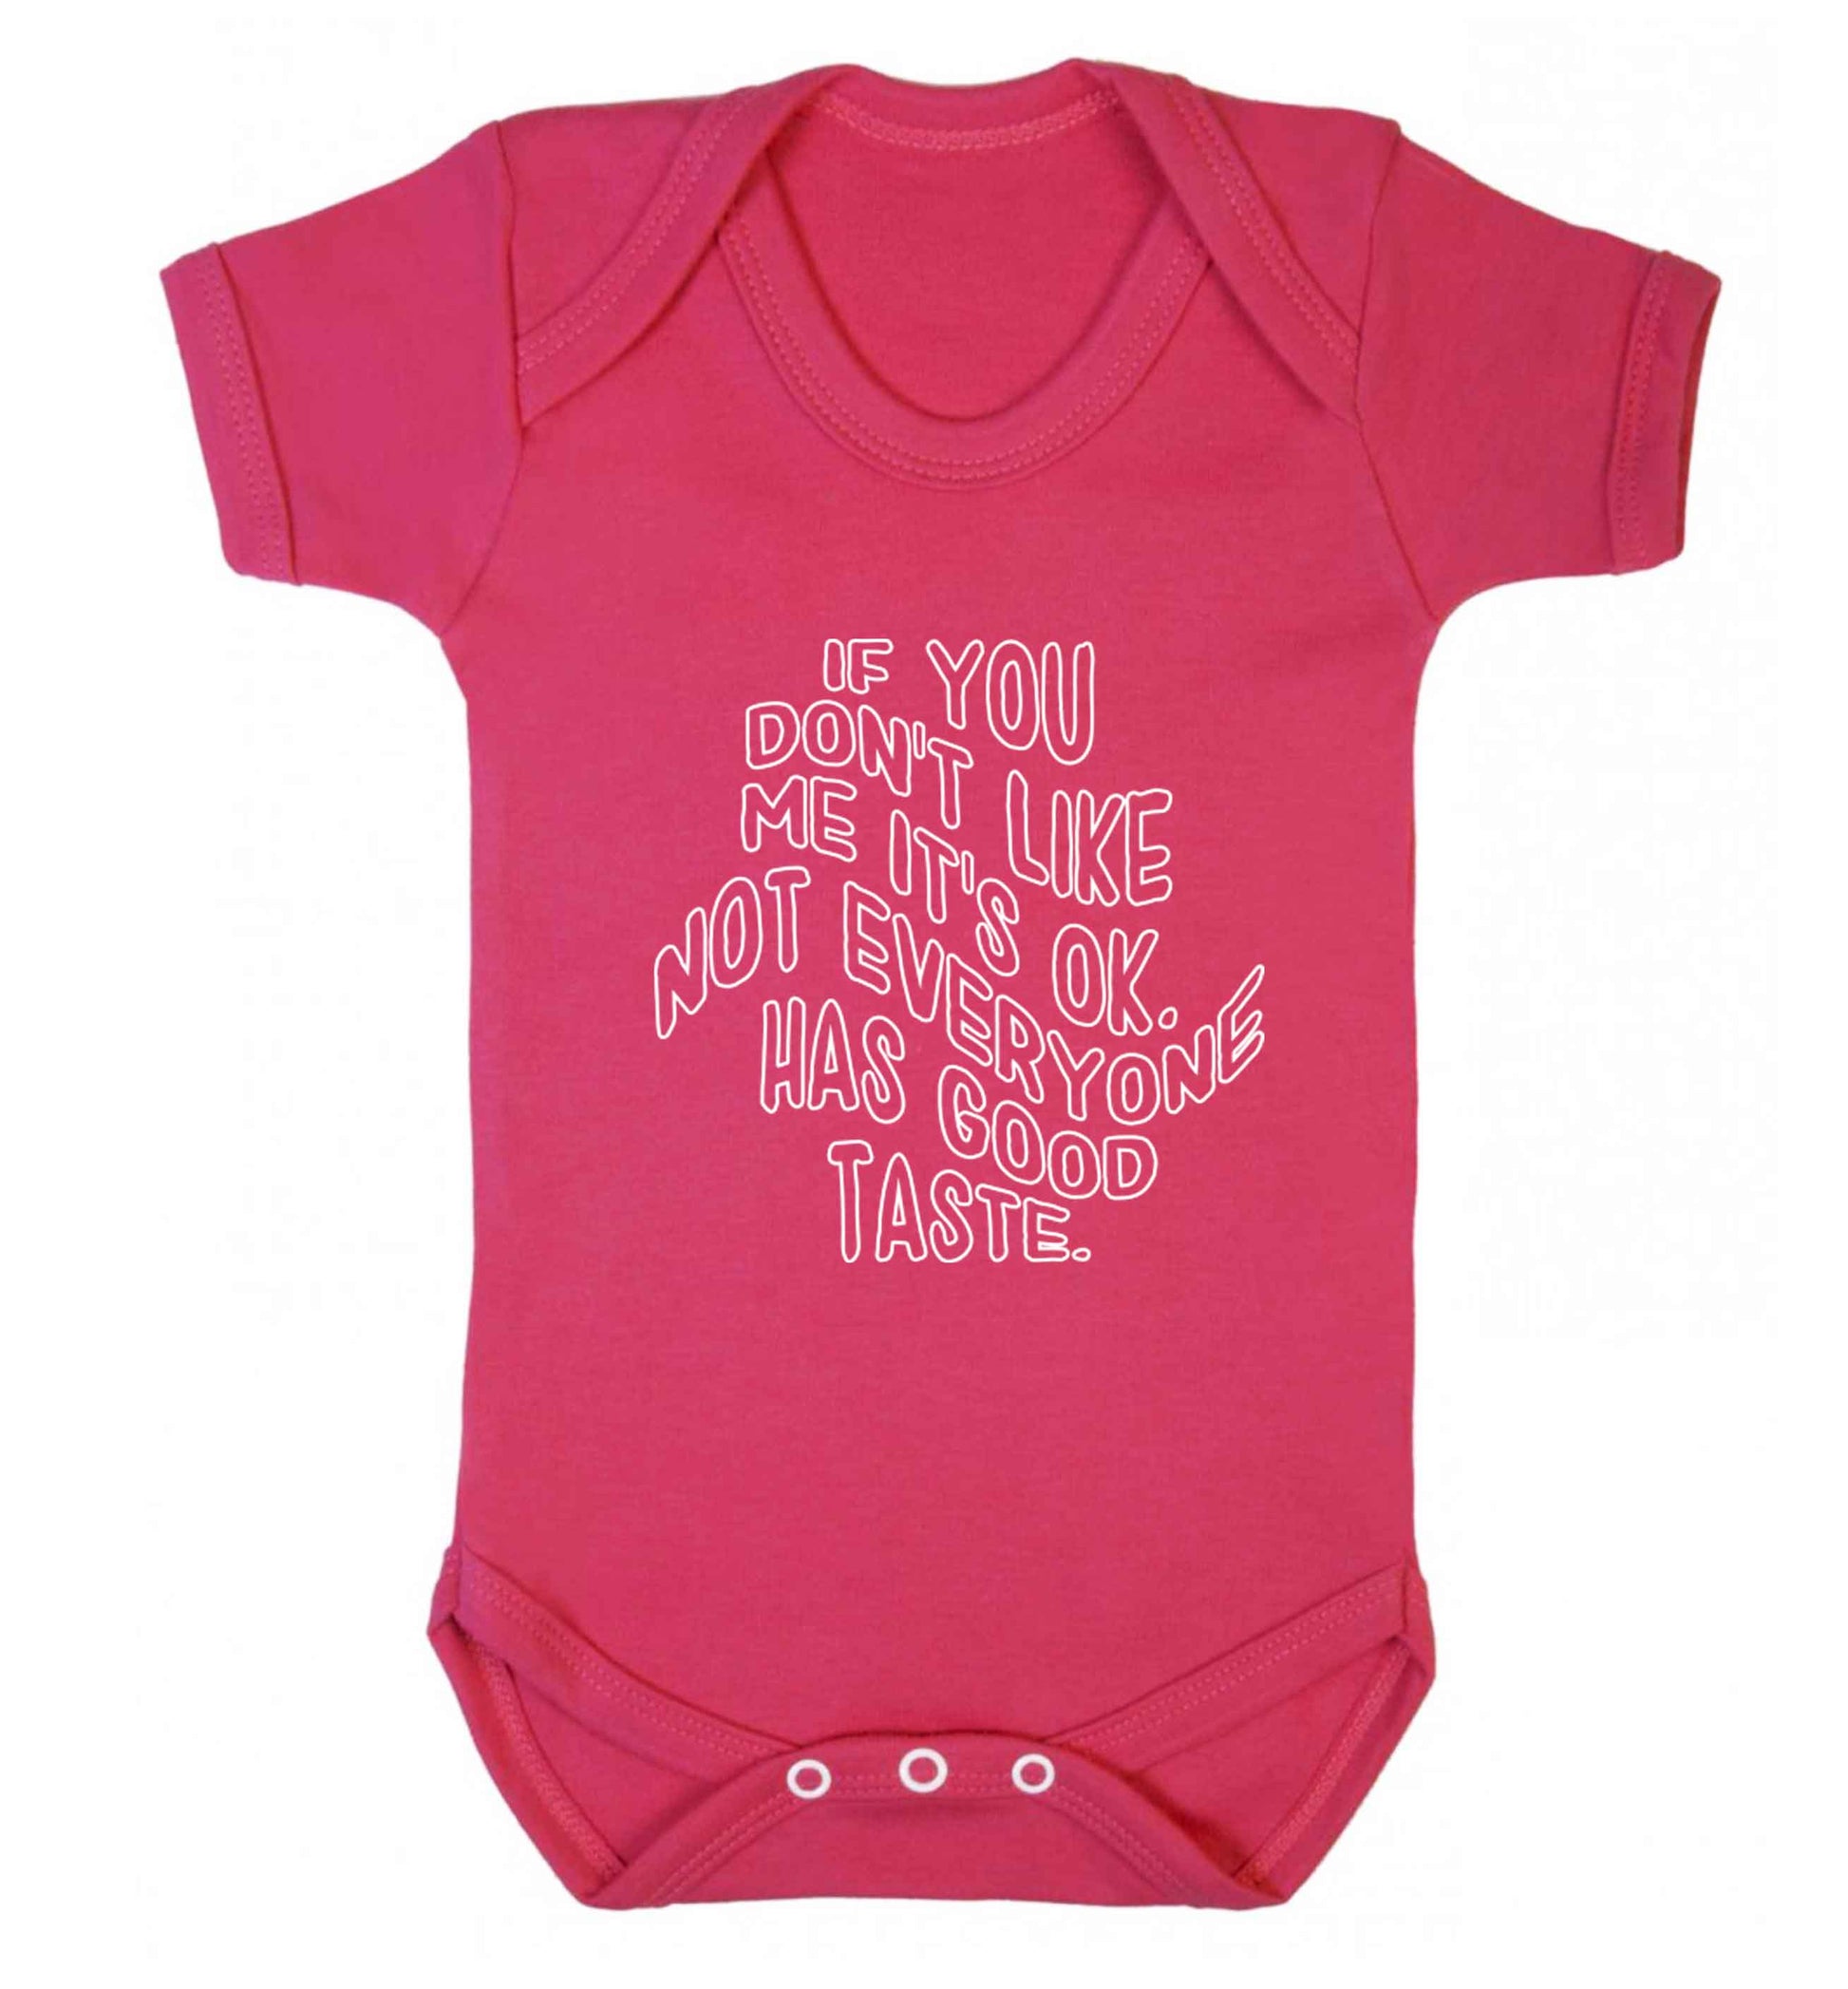 If you don't like me it's ok not everyone has good taste baby vest dark pink 18-24 months